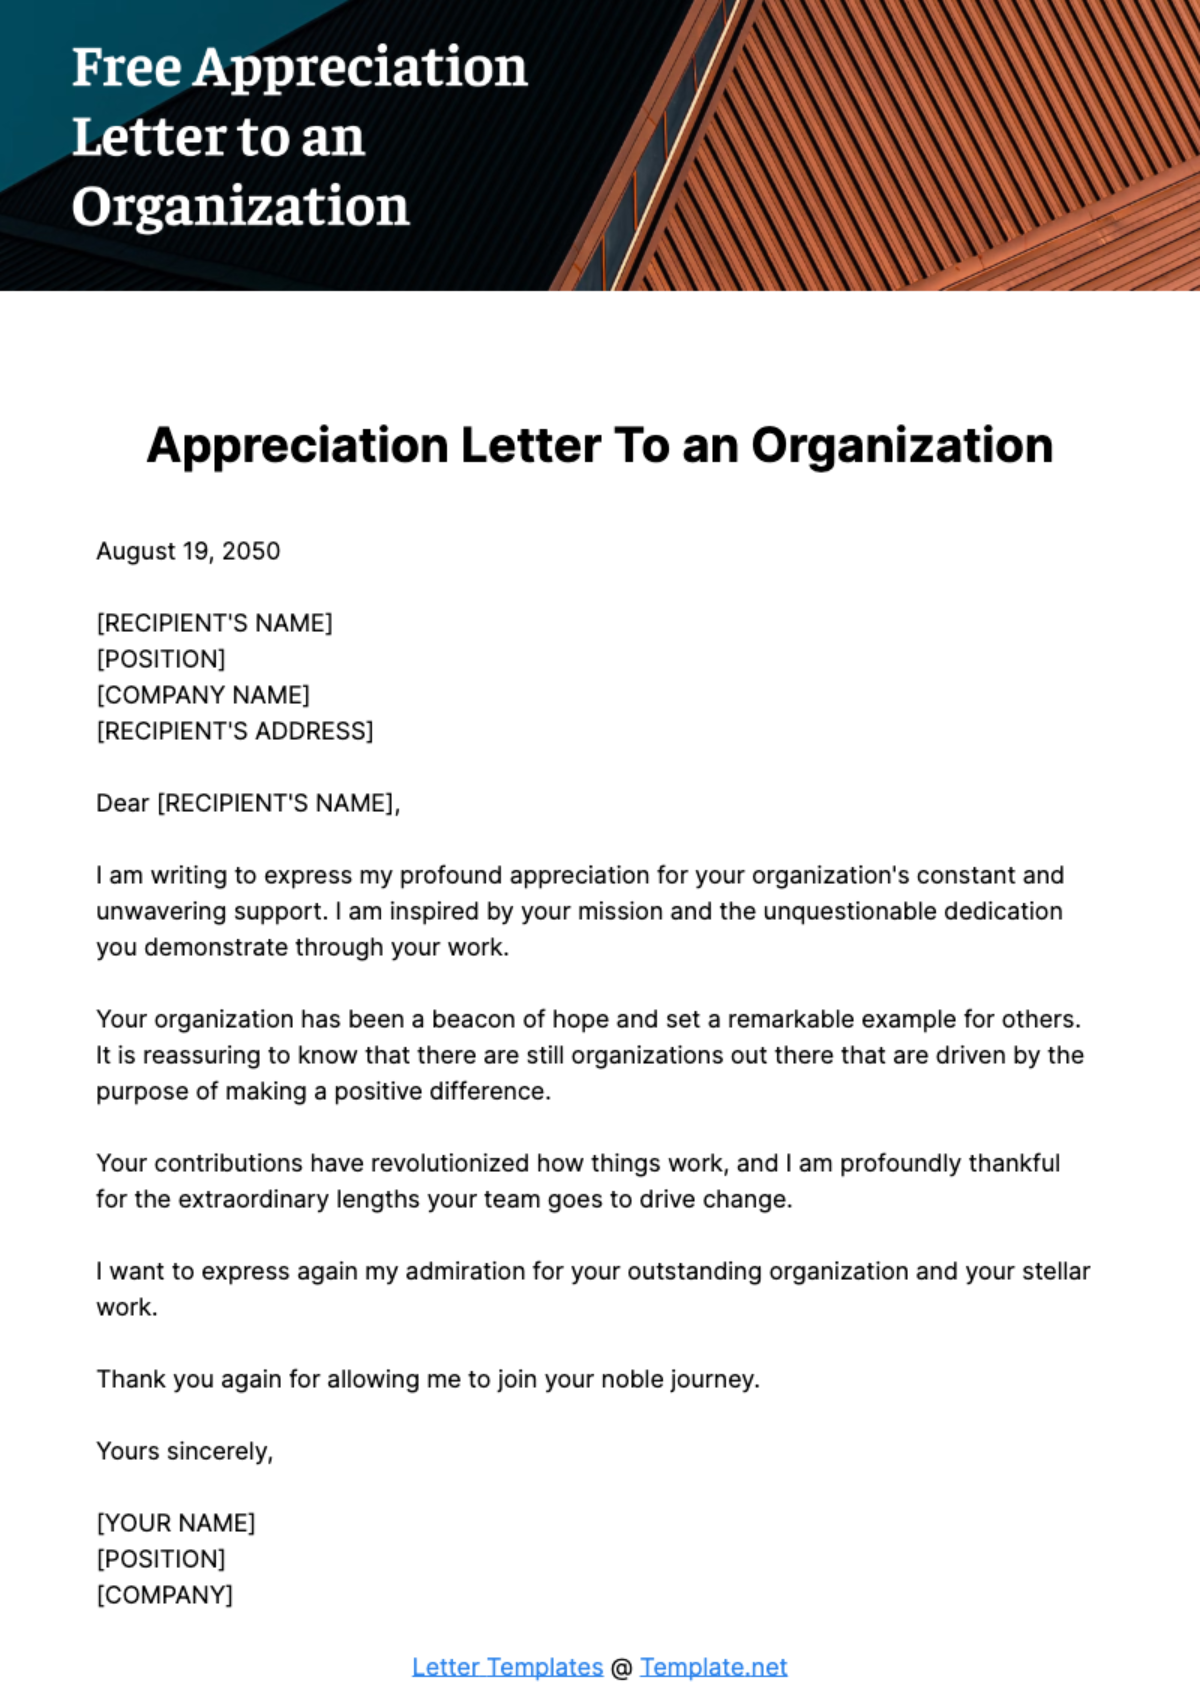 Free Appreciation Letter to an Organization Template